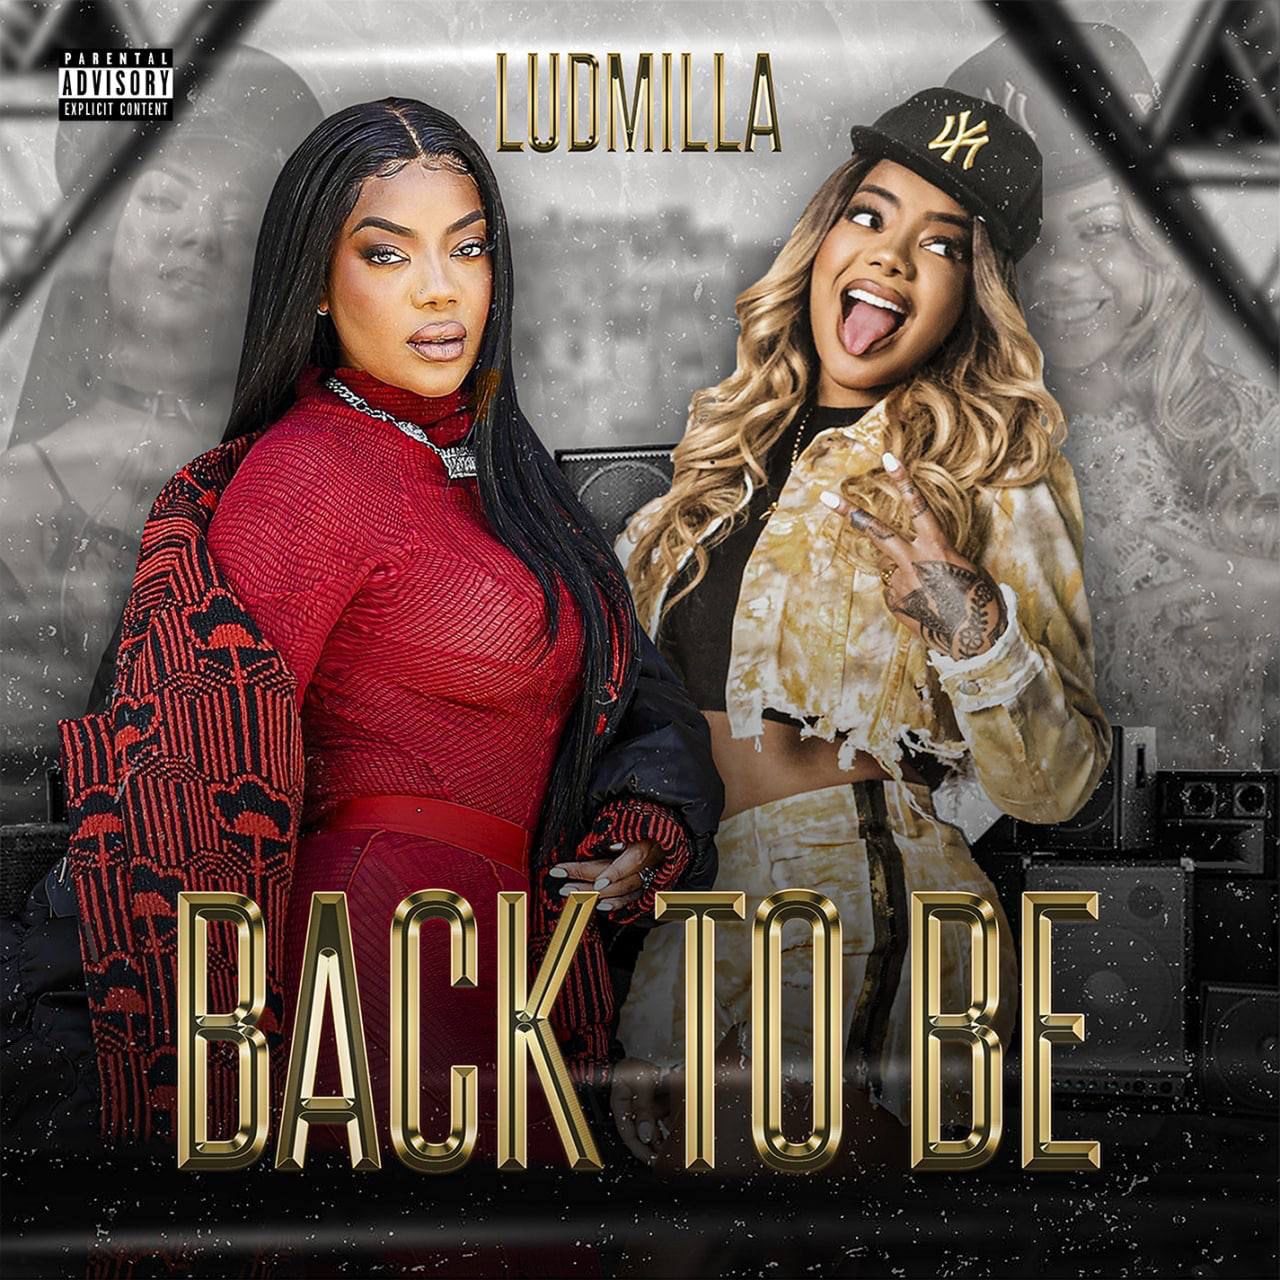 LUDMILLA — BACK TO BE cover artwork